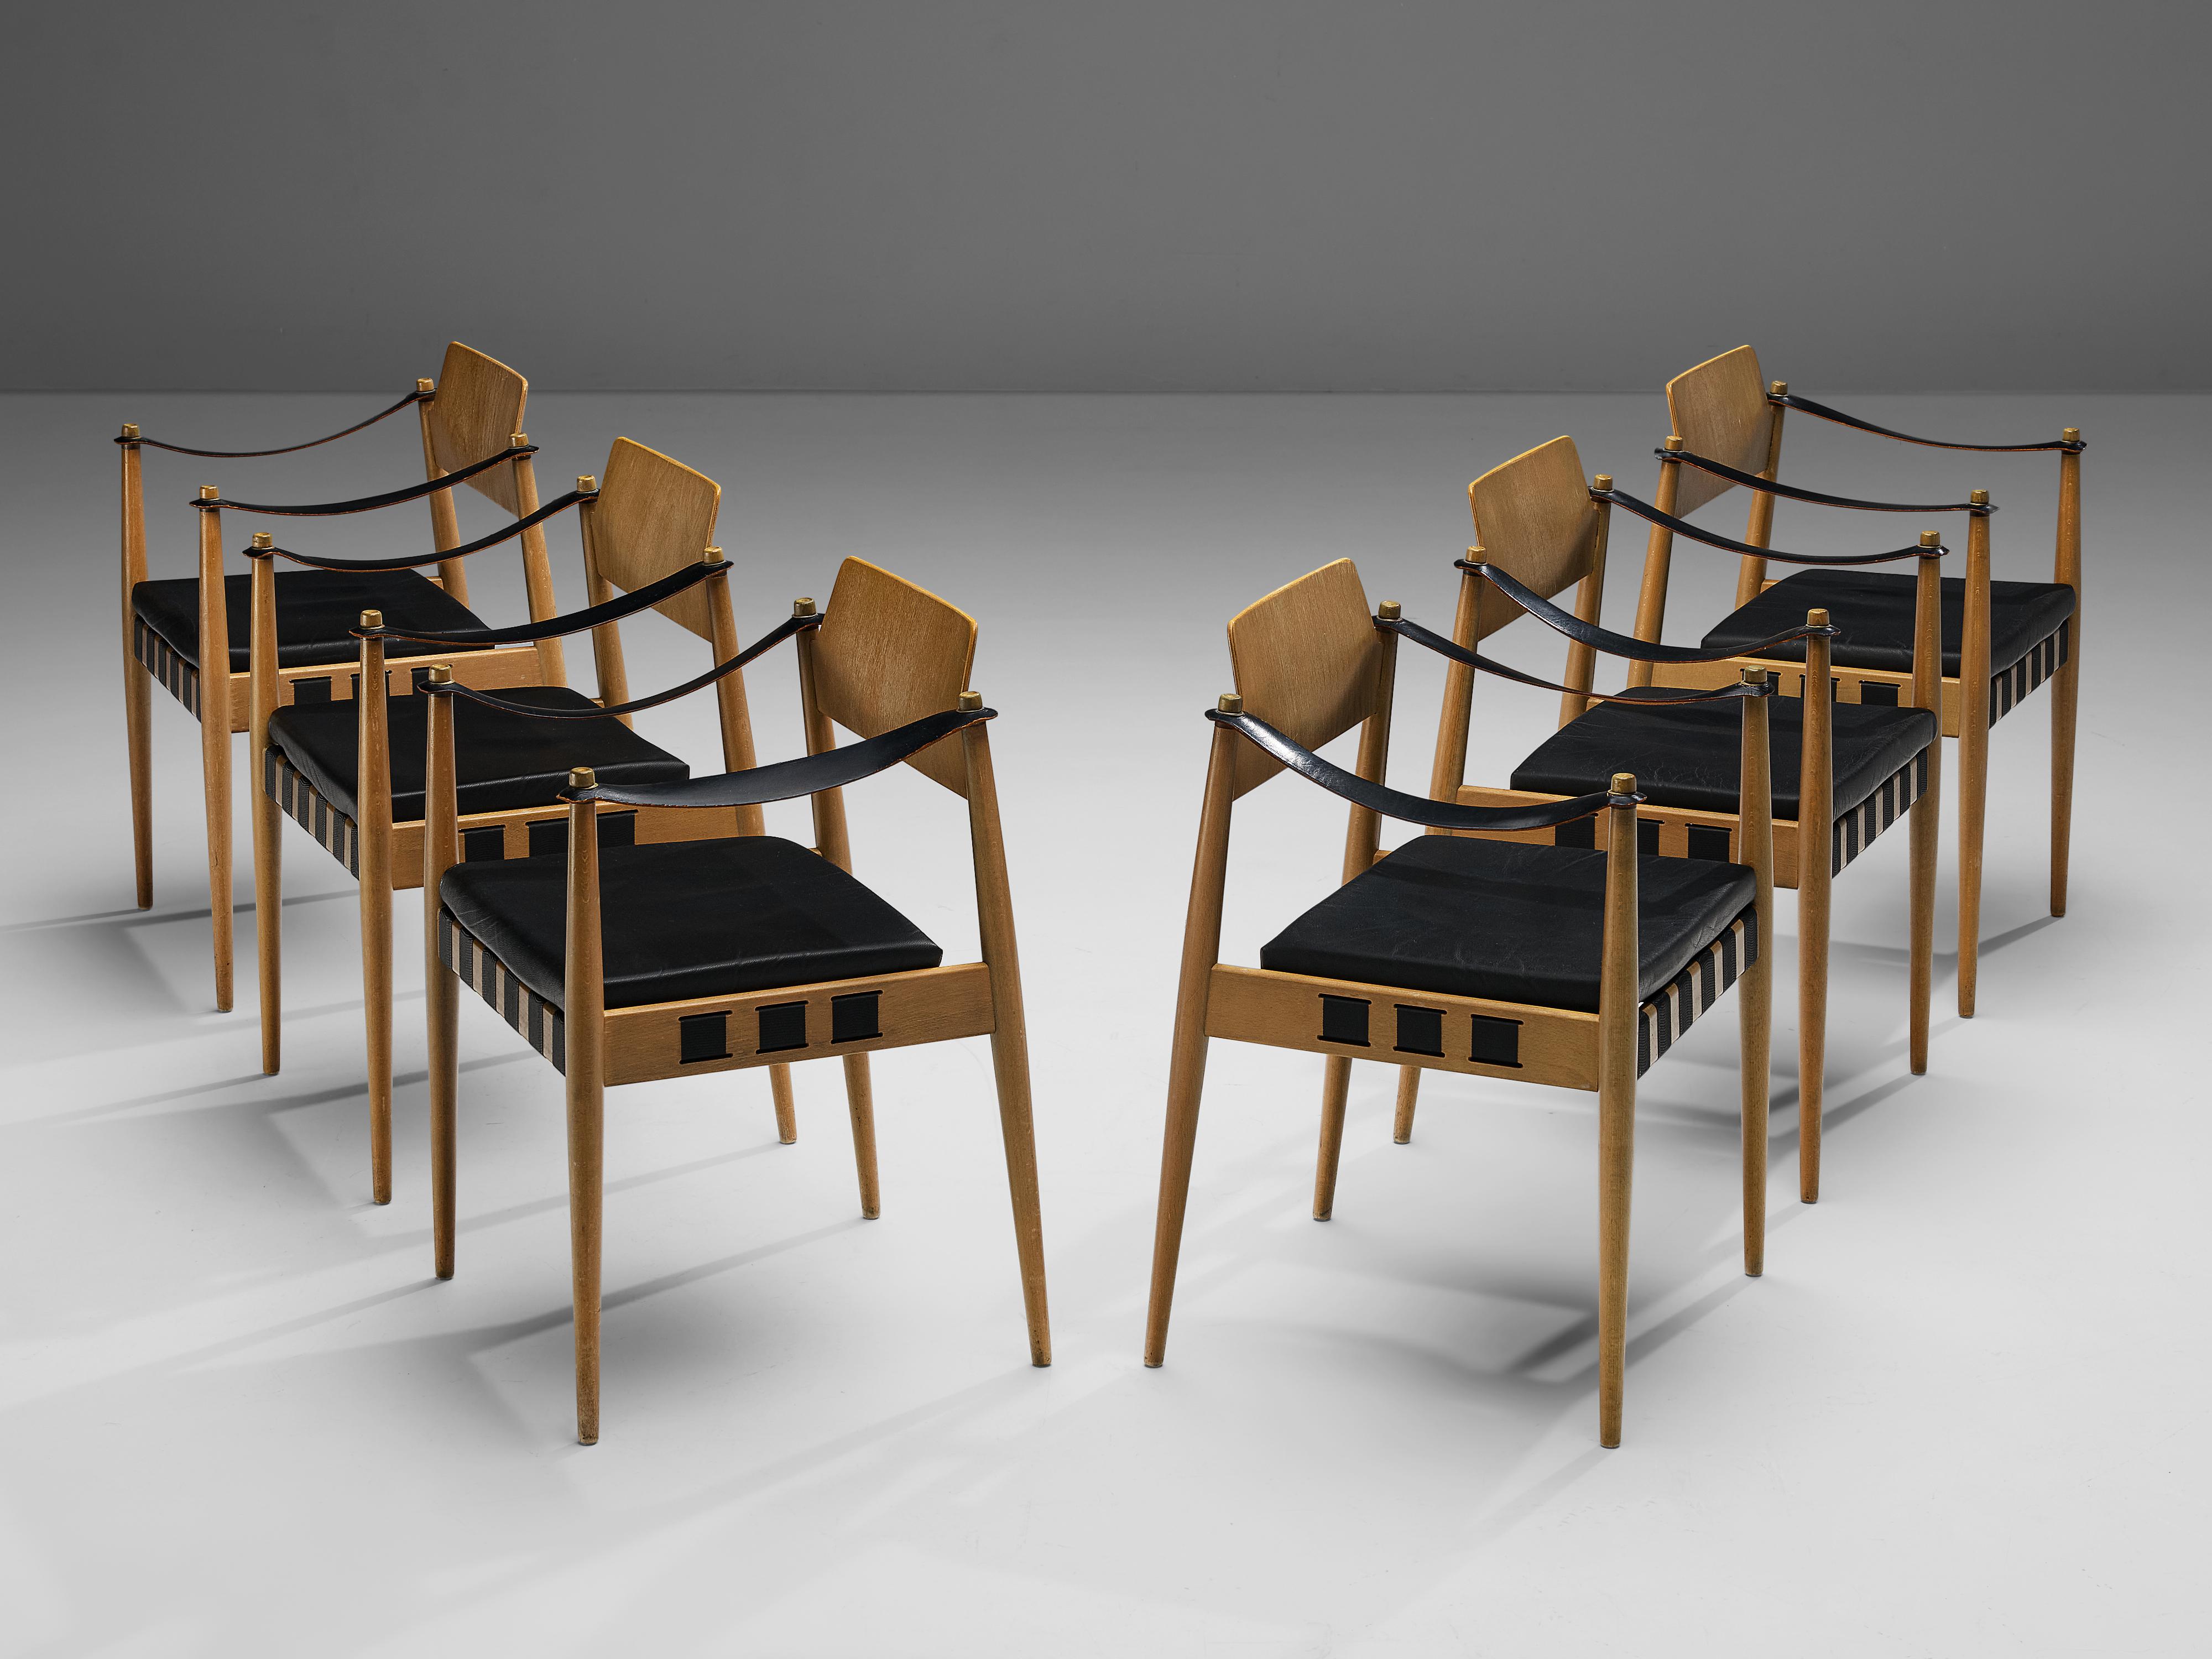 Egon Eiermann for Wilde and Spieth, set of six armchairs, beech, leather, leatherette, Germany, 1960s

Famous postwar German architect Egon Eiermann designed these armchairs for German manufacturer Wilde + Spieth in the early 1960s. These armchairs